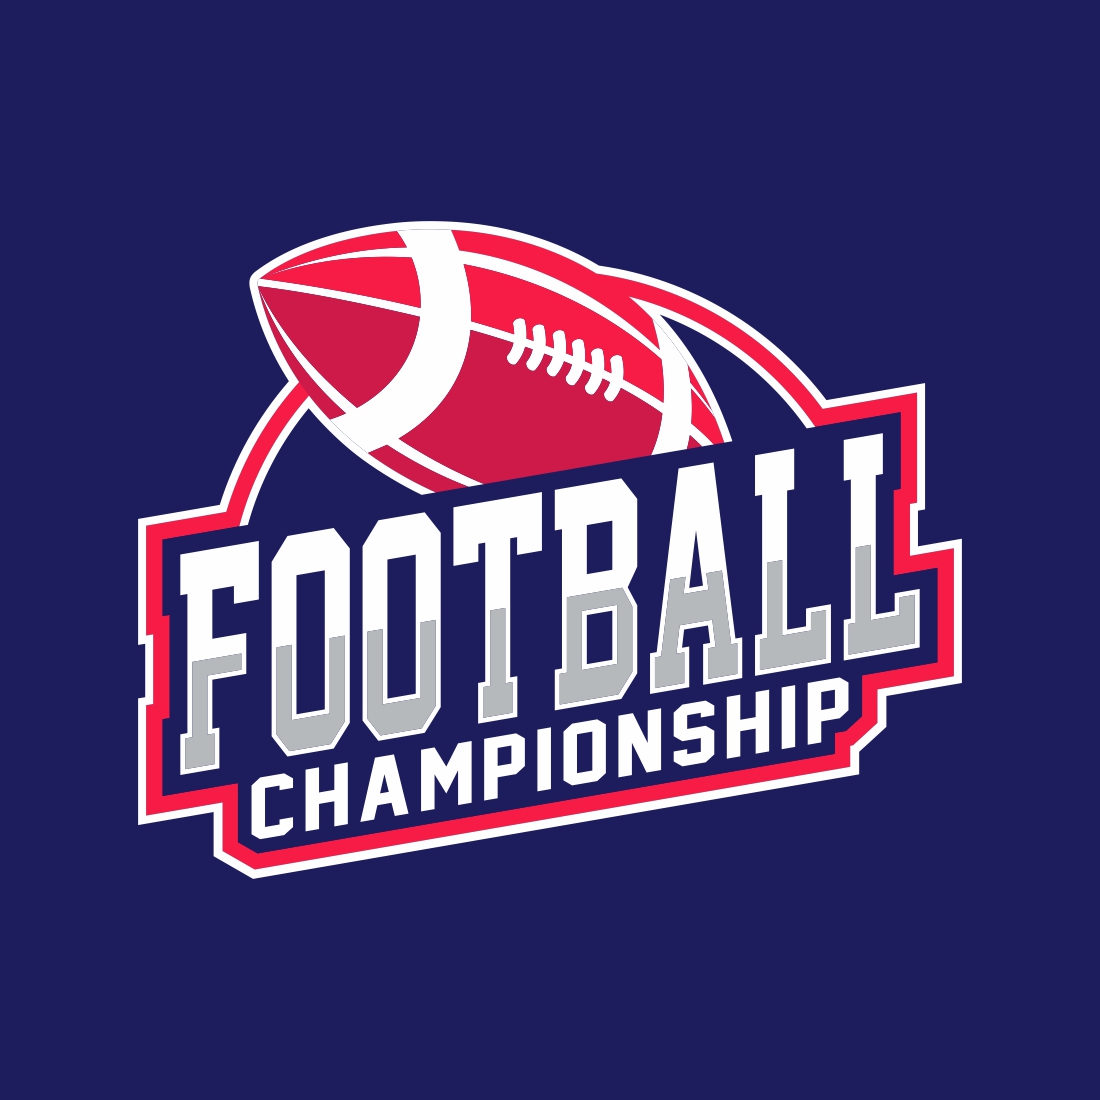 American Football Sports logo and badge – Only $7 cover image.